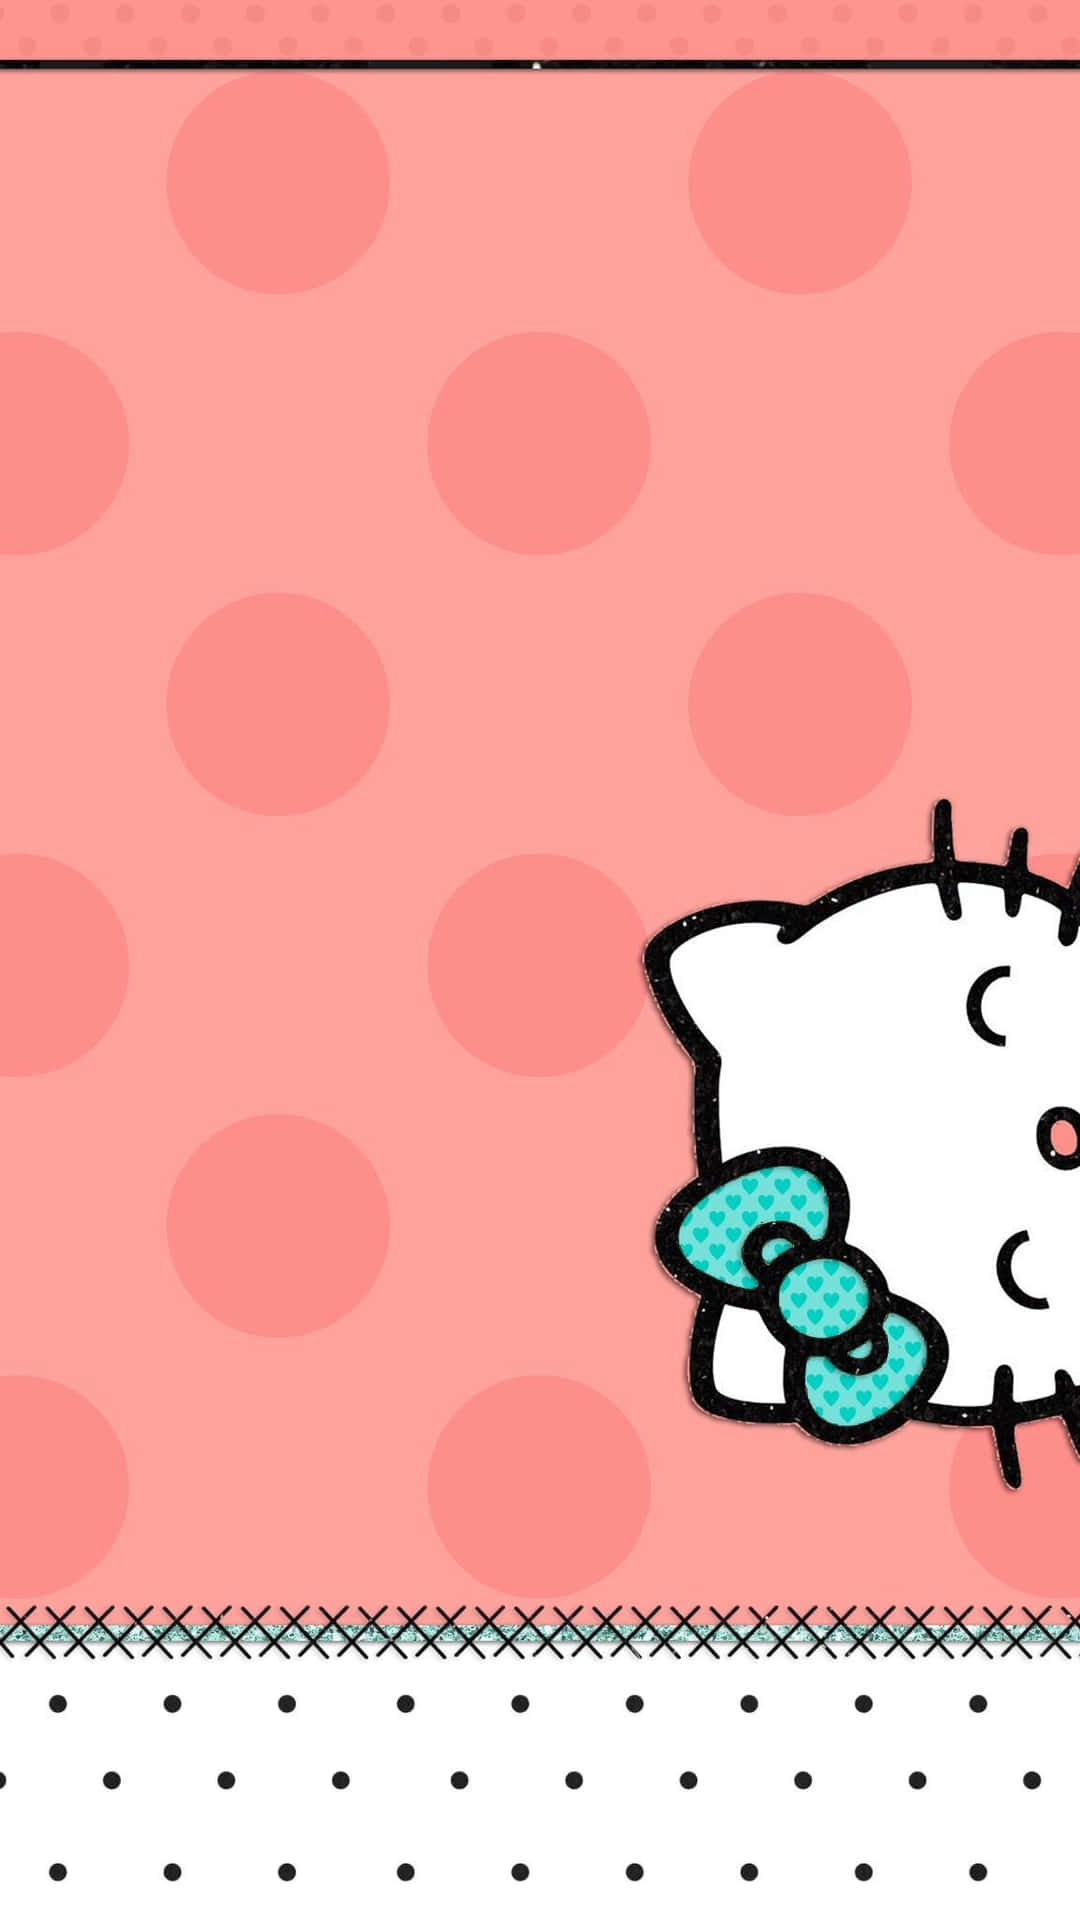 Make your mobile phone cuter with the Sanrio Phone Wallpaper